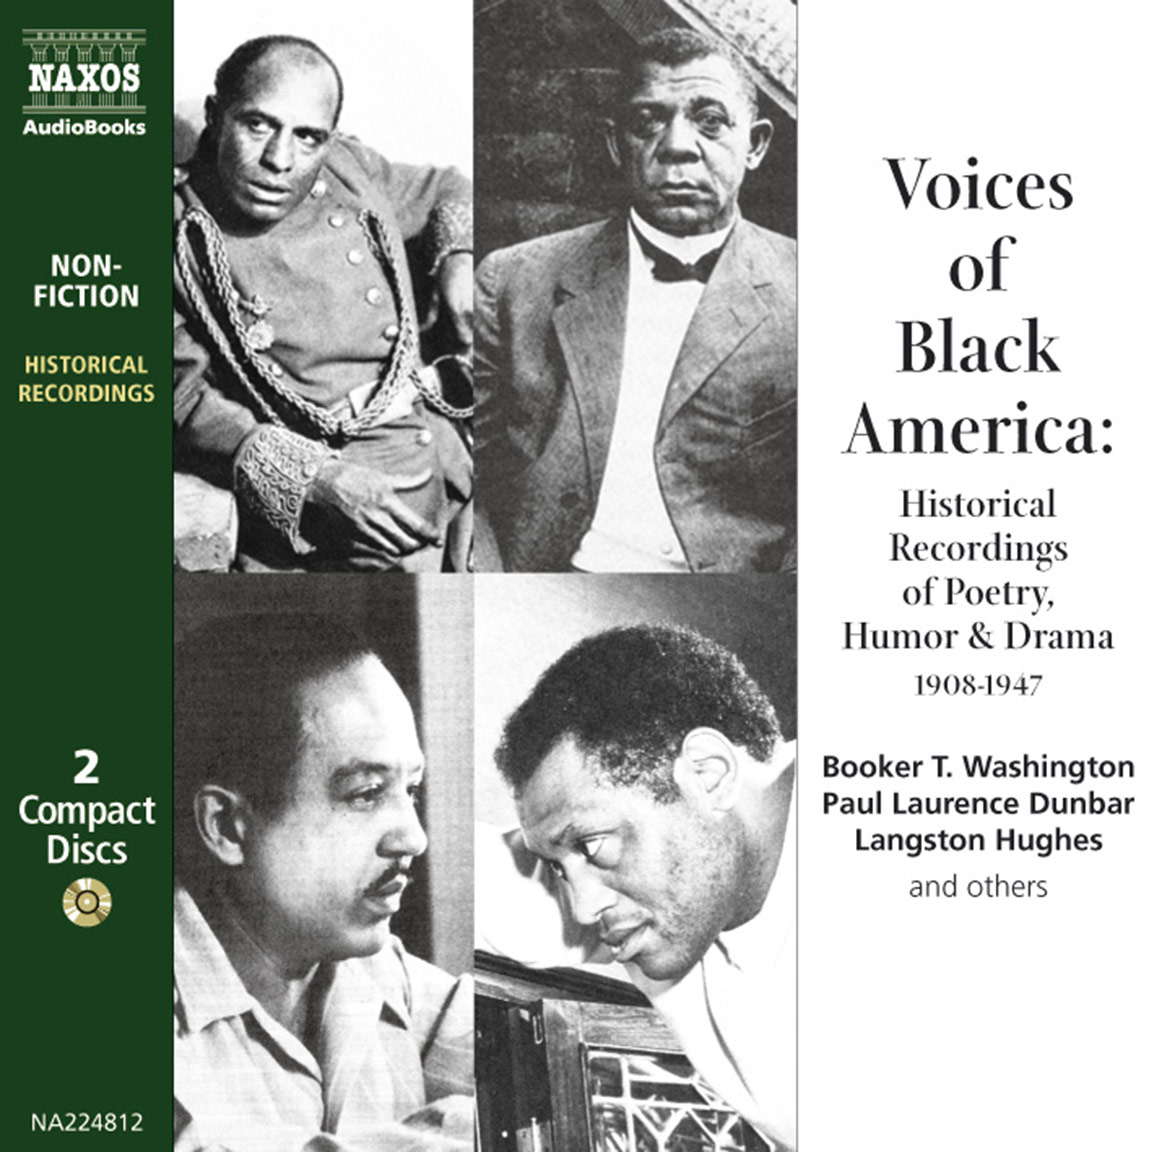 Voices of Black America (compilation)